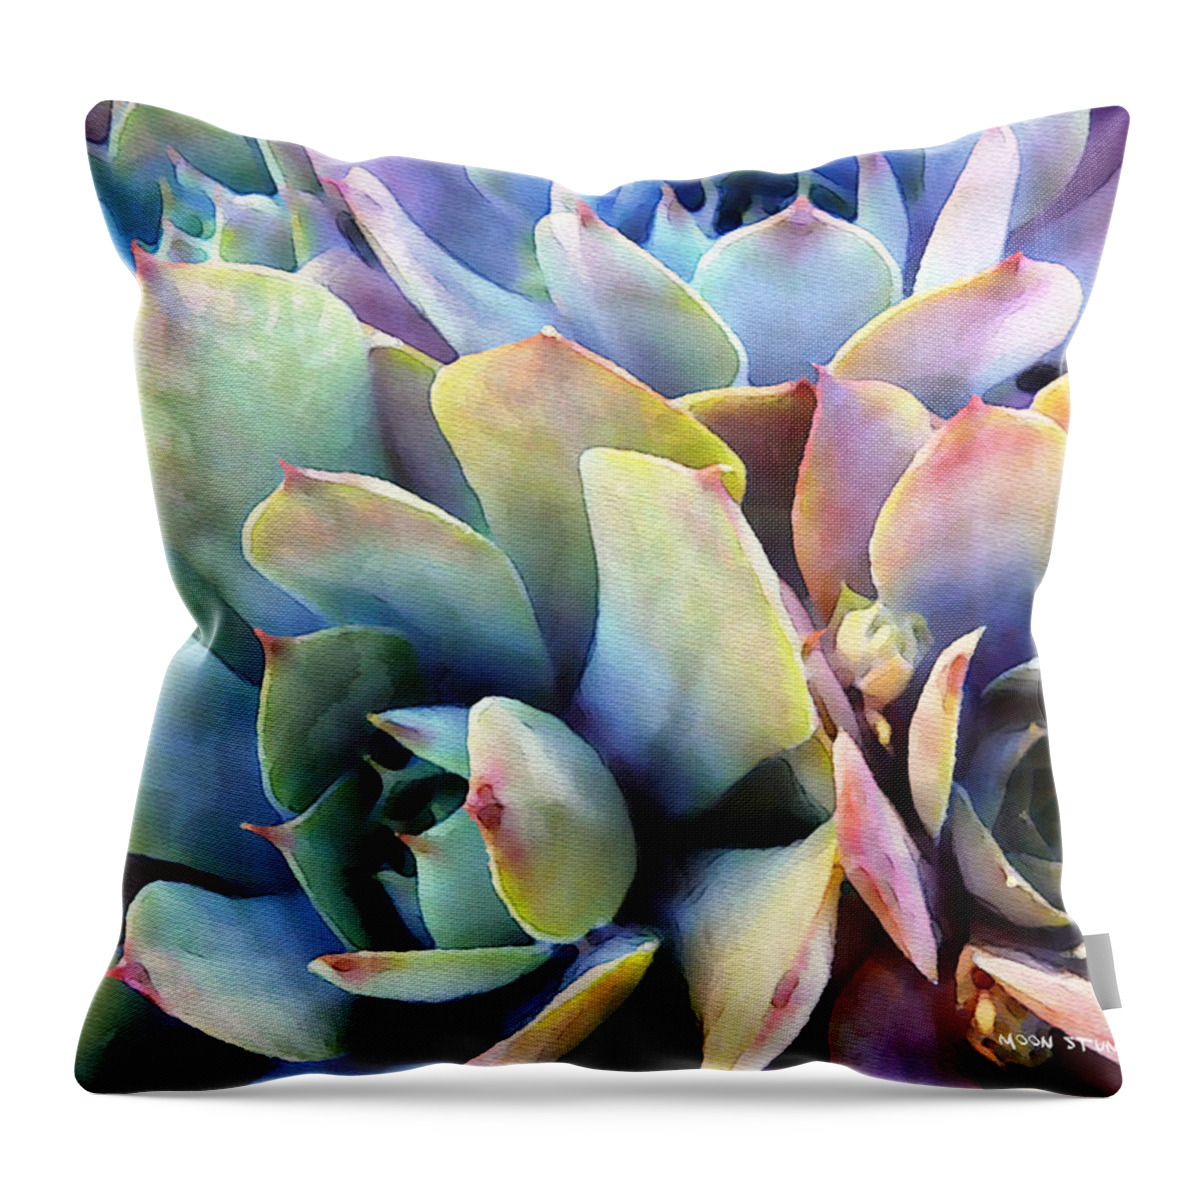 Hens And Chicks Photography Throw Pillow featuring the painting Hens and Chicks series - Soft Tints by Moon Stumpp